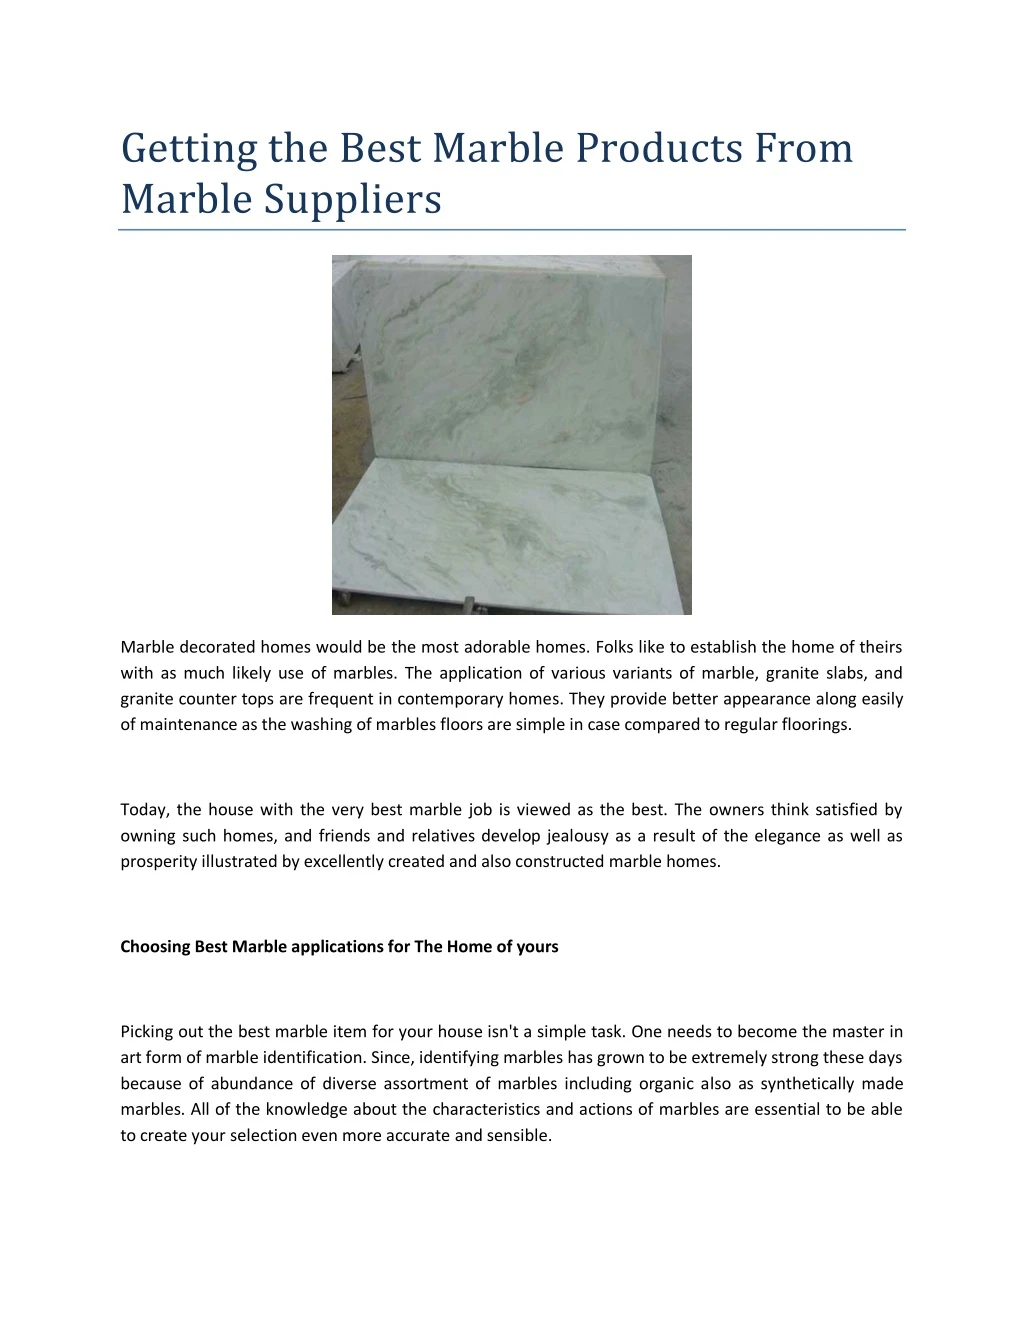 getting the best marble products from marble